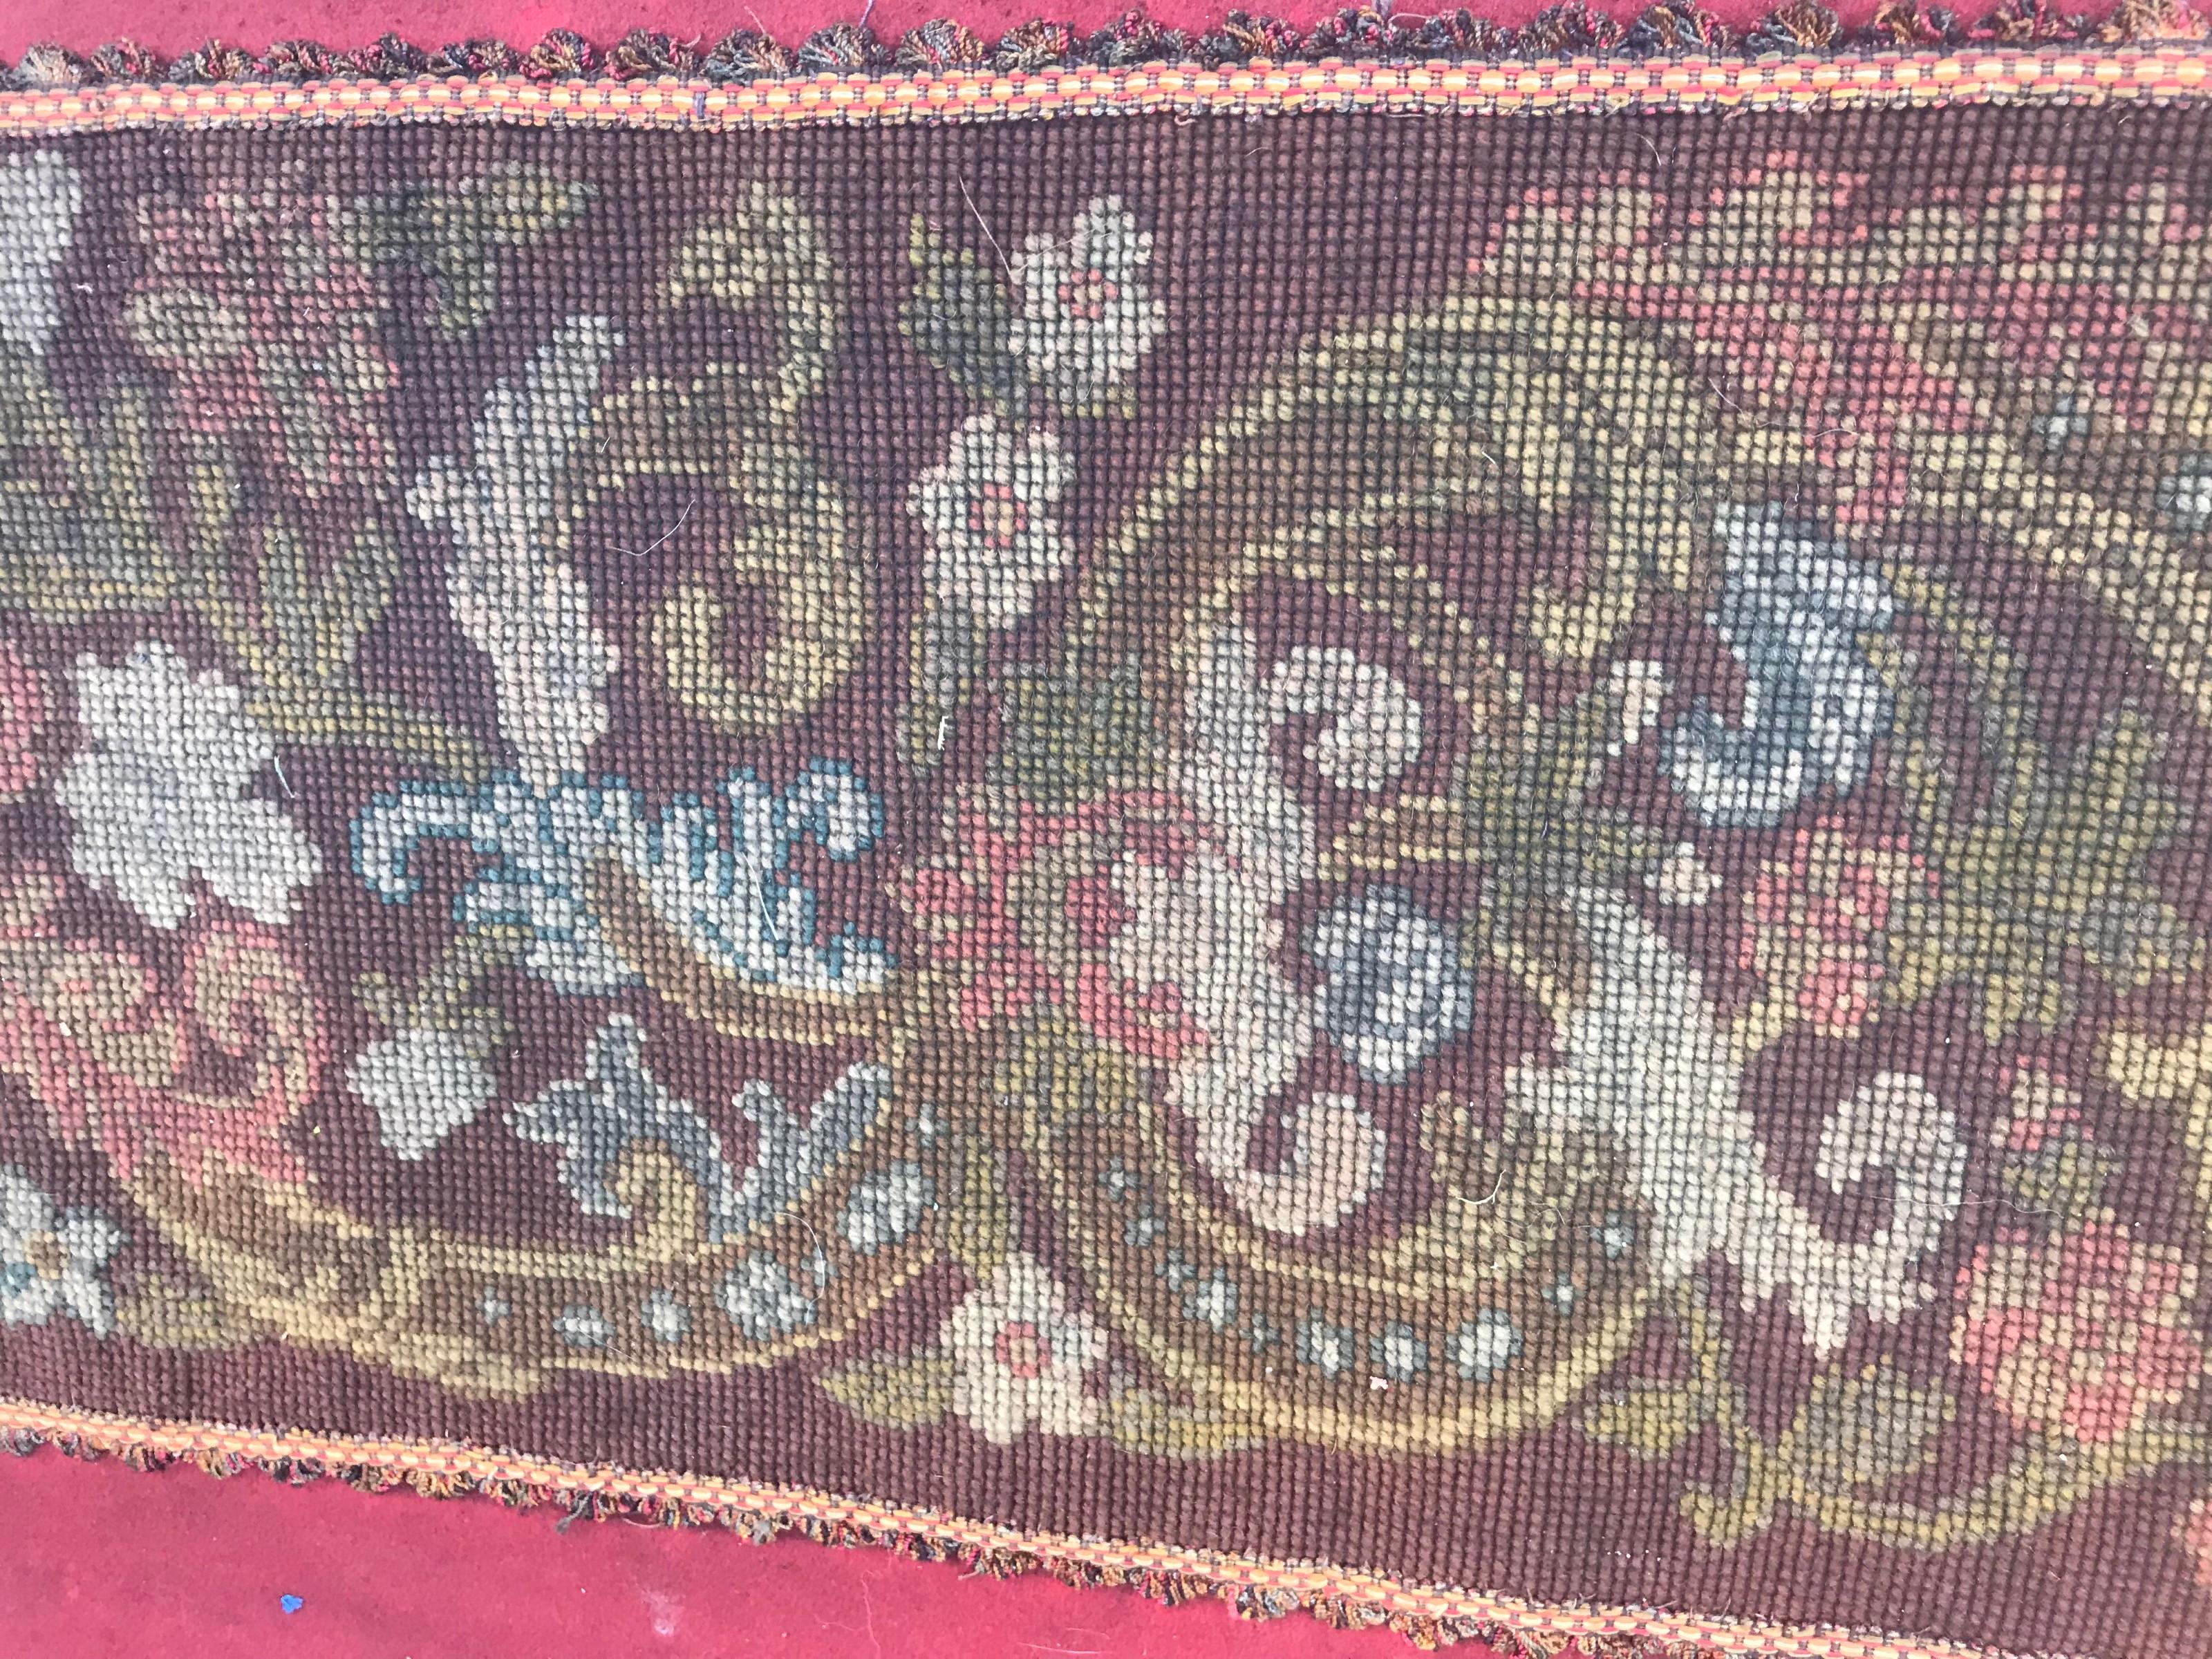 Aubusson Antique Needlepoint Tapestry Panel